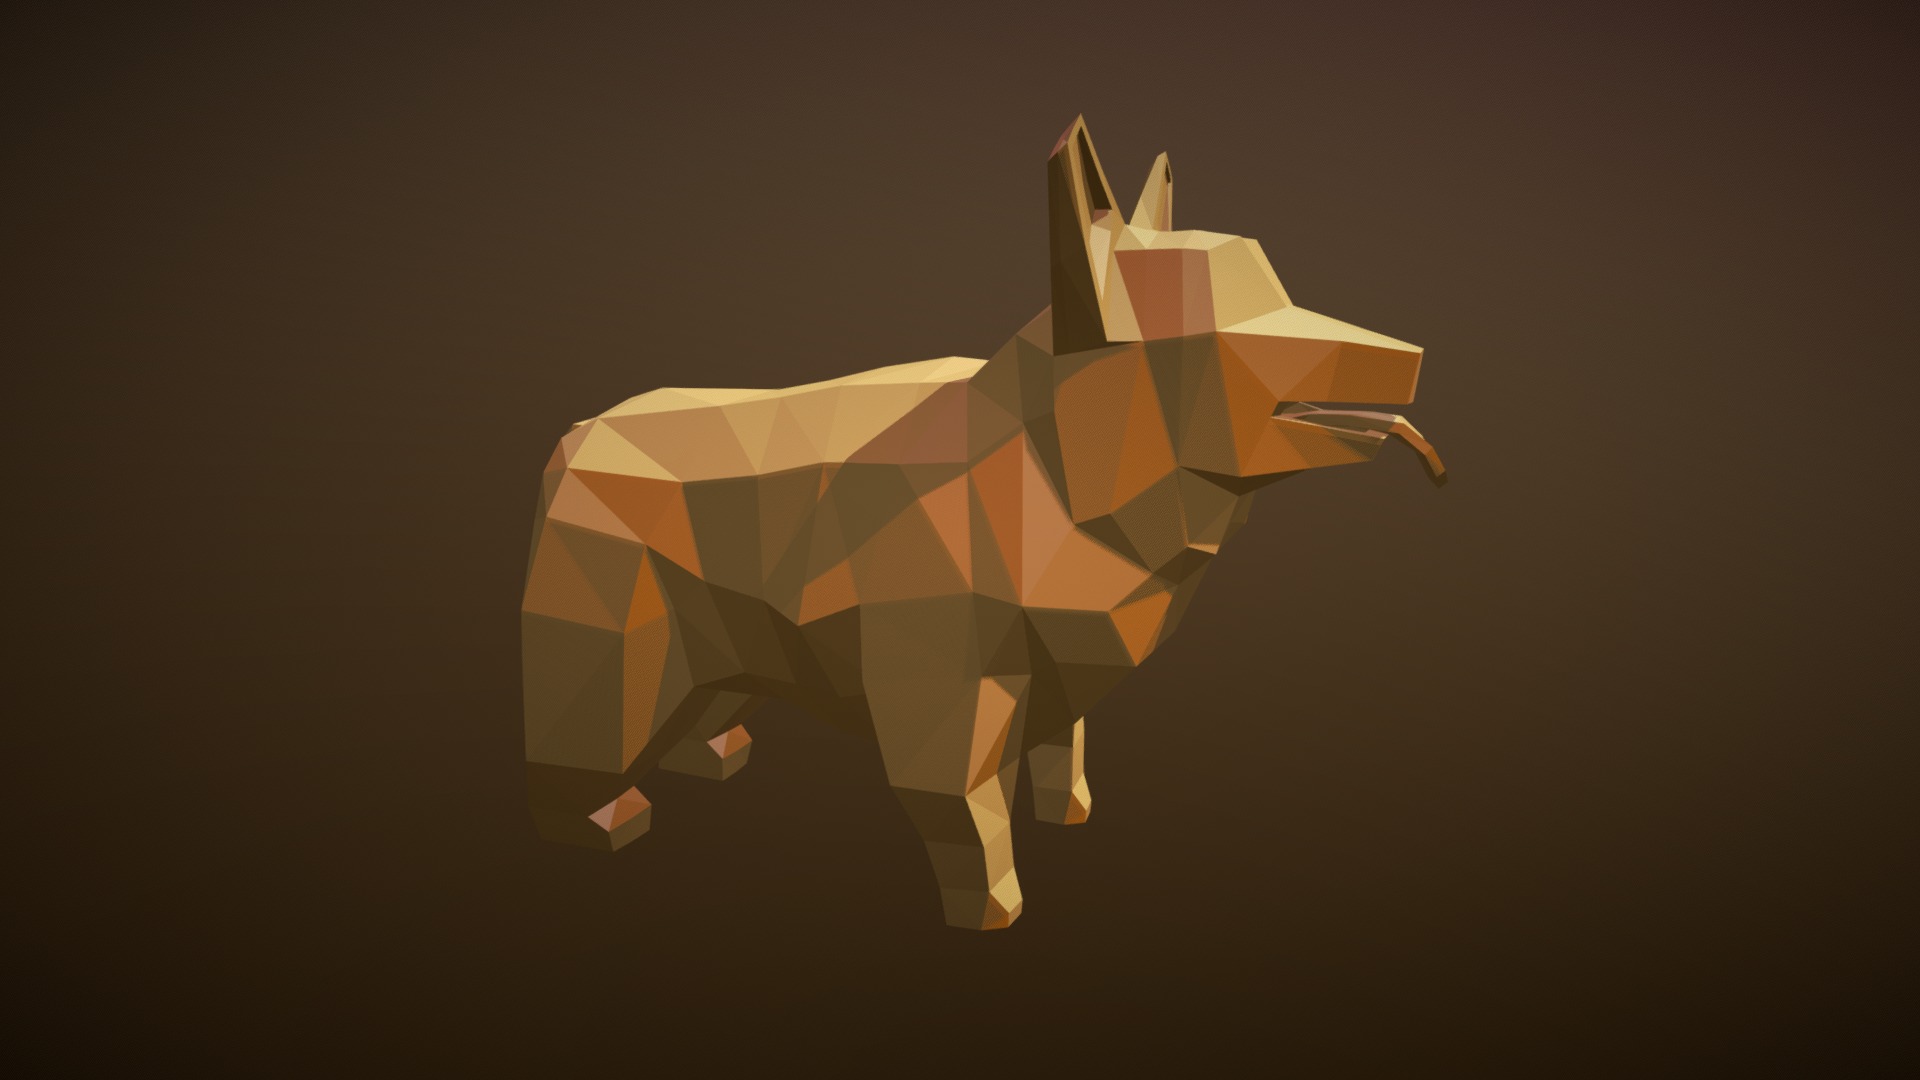 3D model Maple Corgi - This is a 3D model of the Maple Corgi. The 3D model is about a paper airplane made of paper.